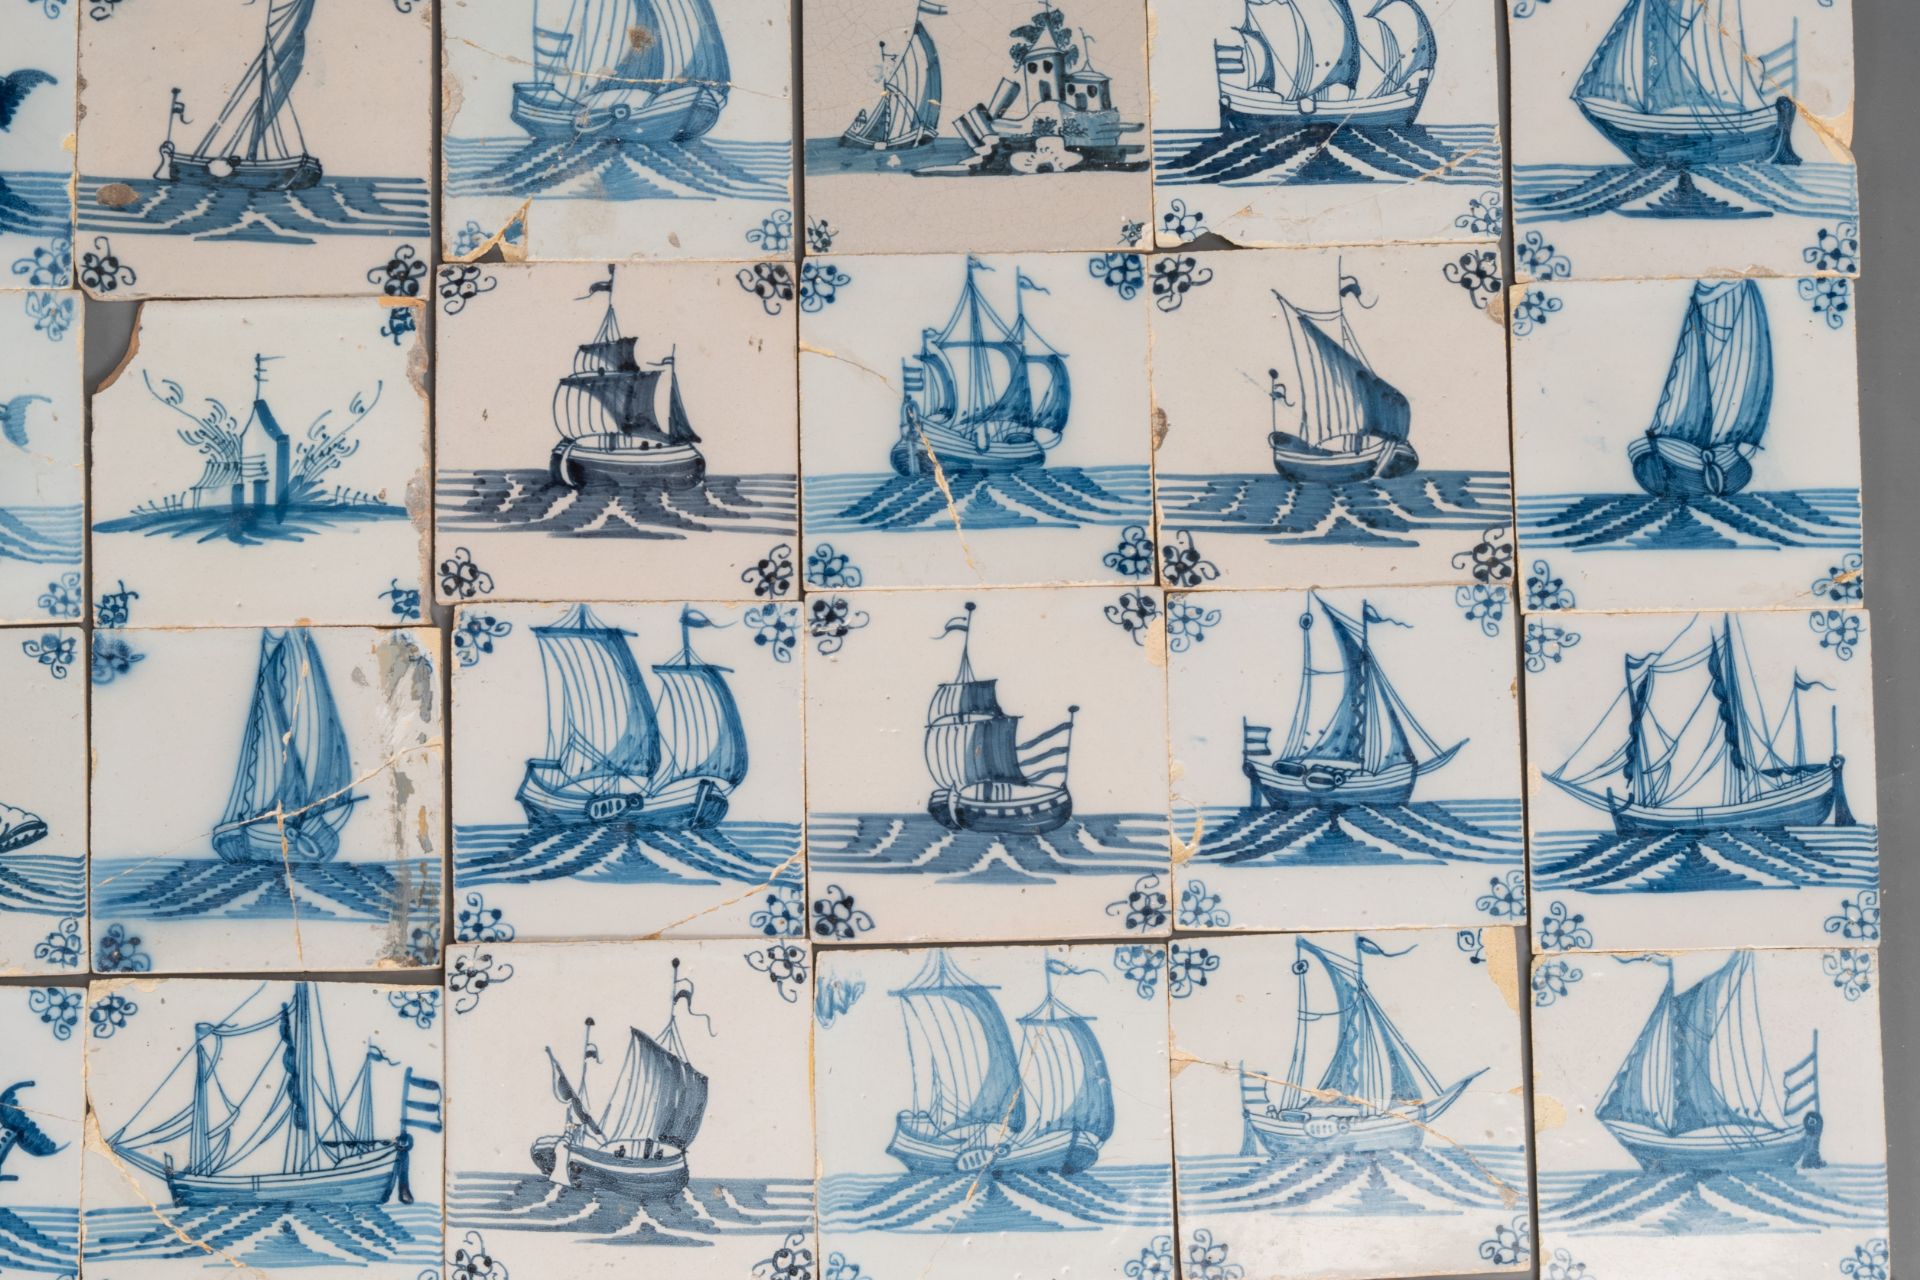 92 blue and white Dutch Delft tiles with sea monsters and ships, 18th C. - Bild 13 aus 16